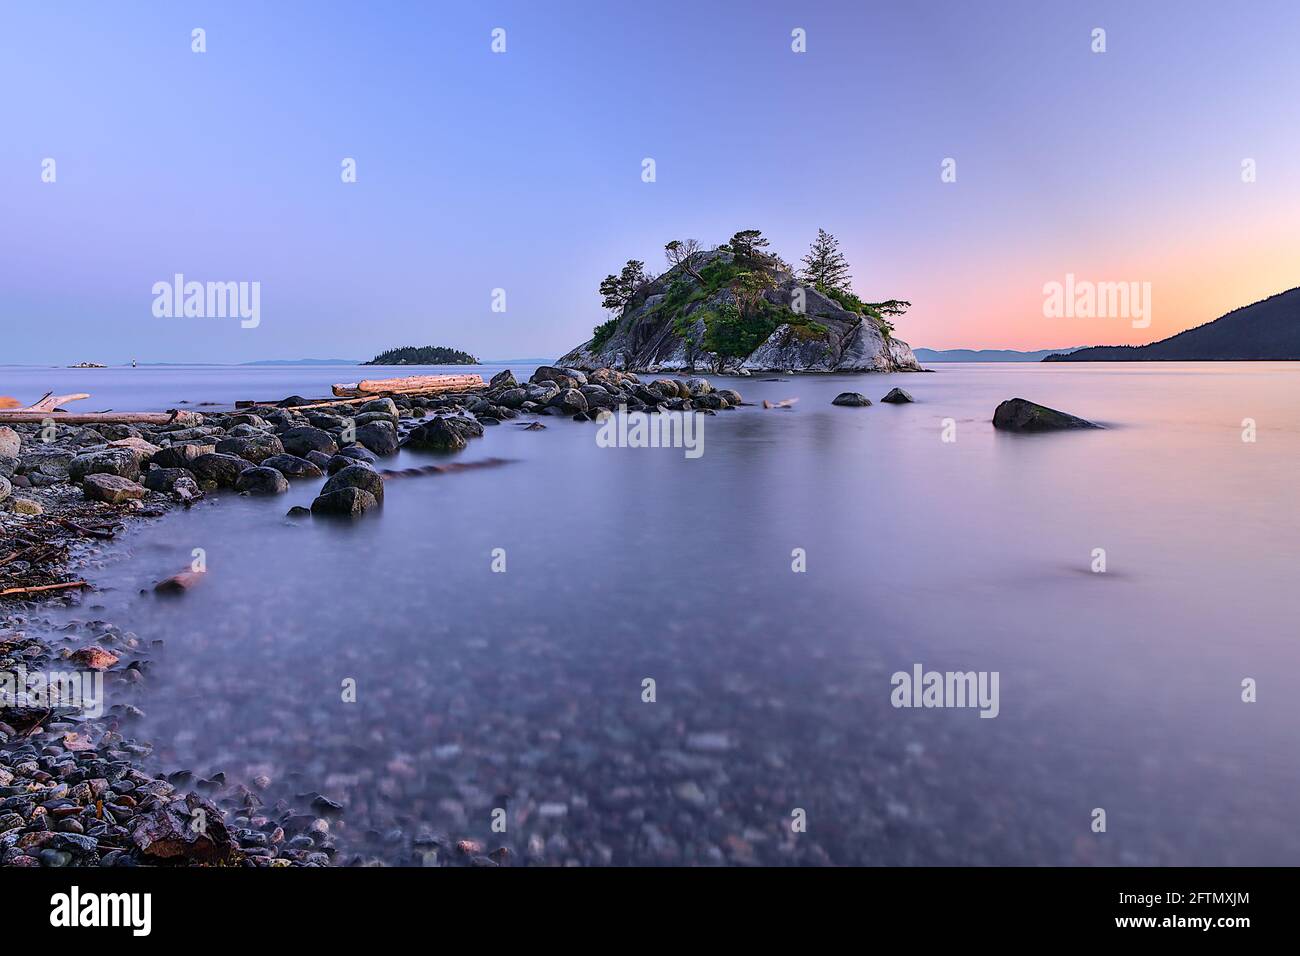 Long exposure shot of Whyte Islet during sunset, Whytecliff Park, West Vancouver, British Columbia, Canada Stock Photo